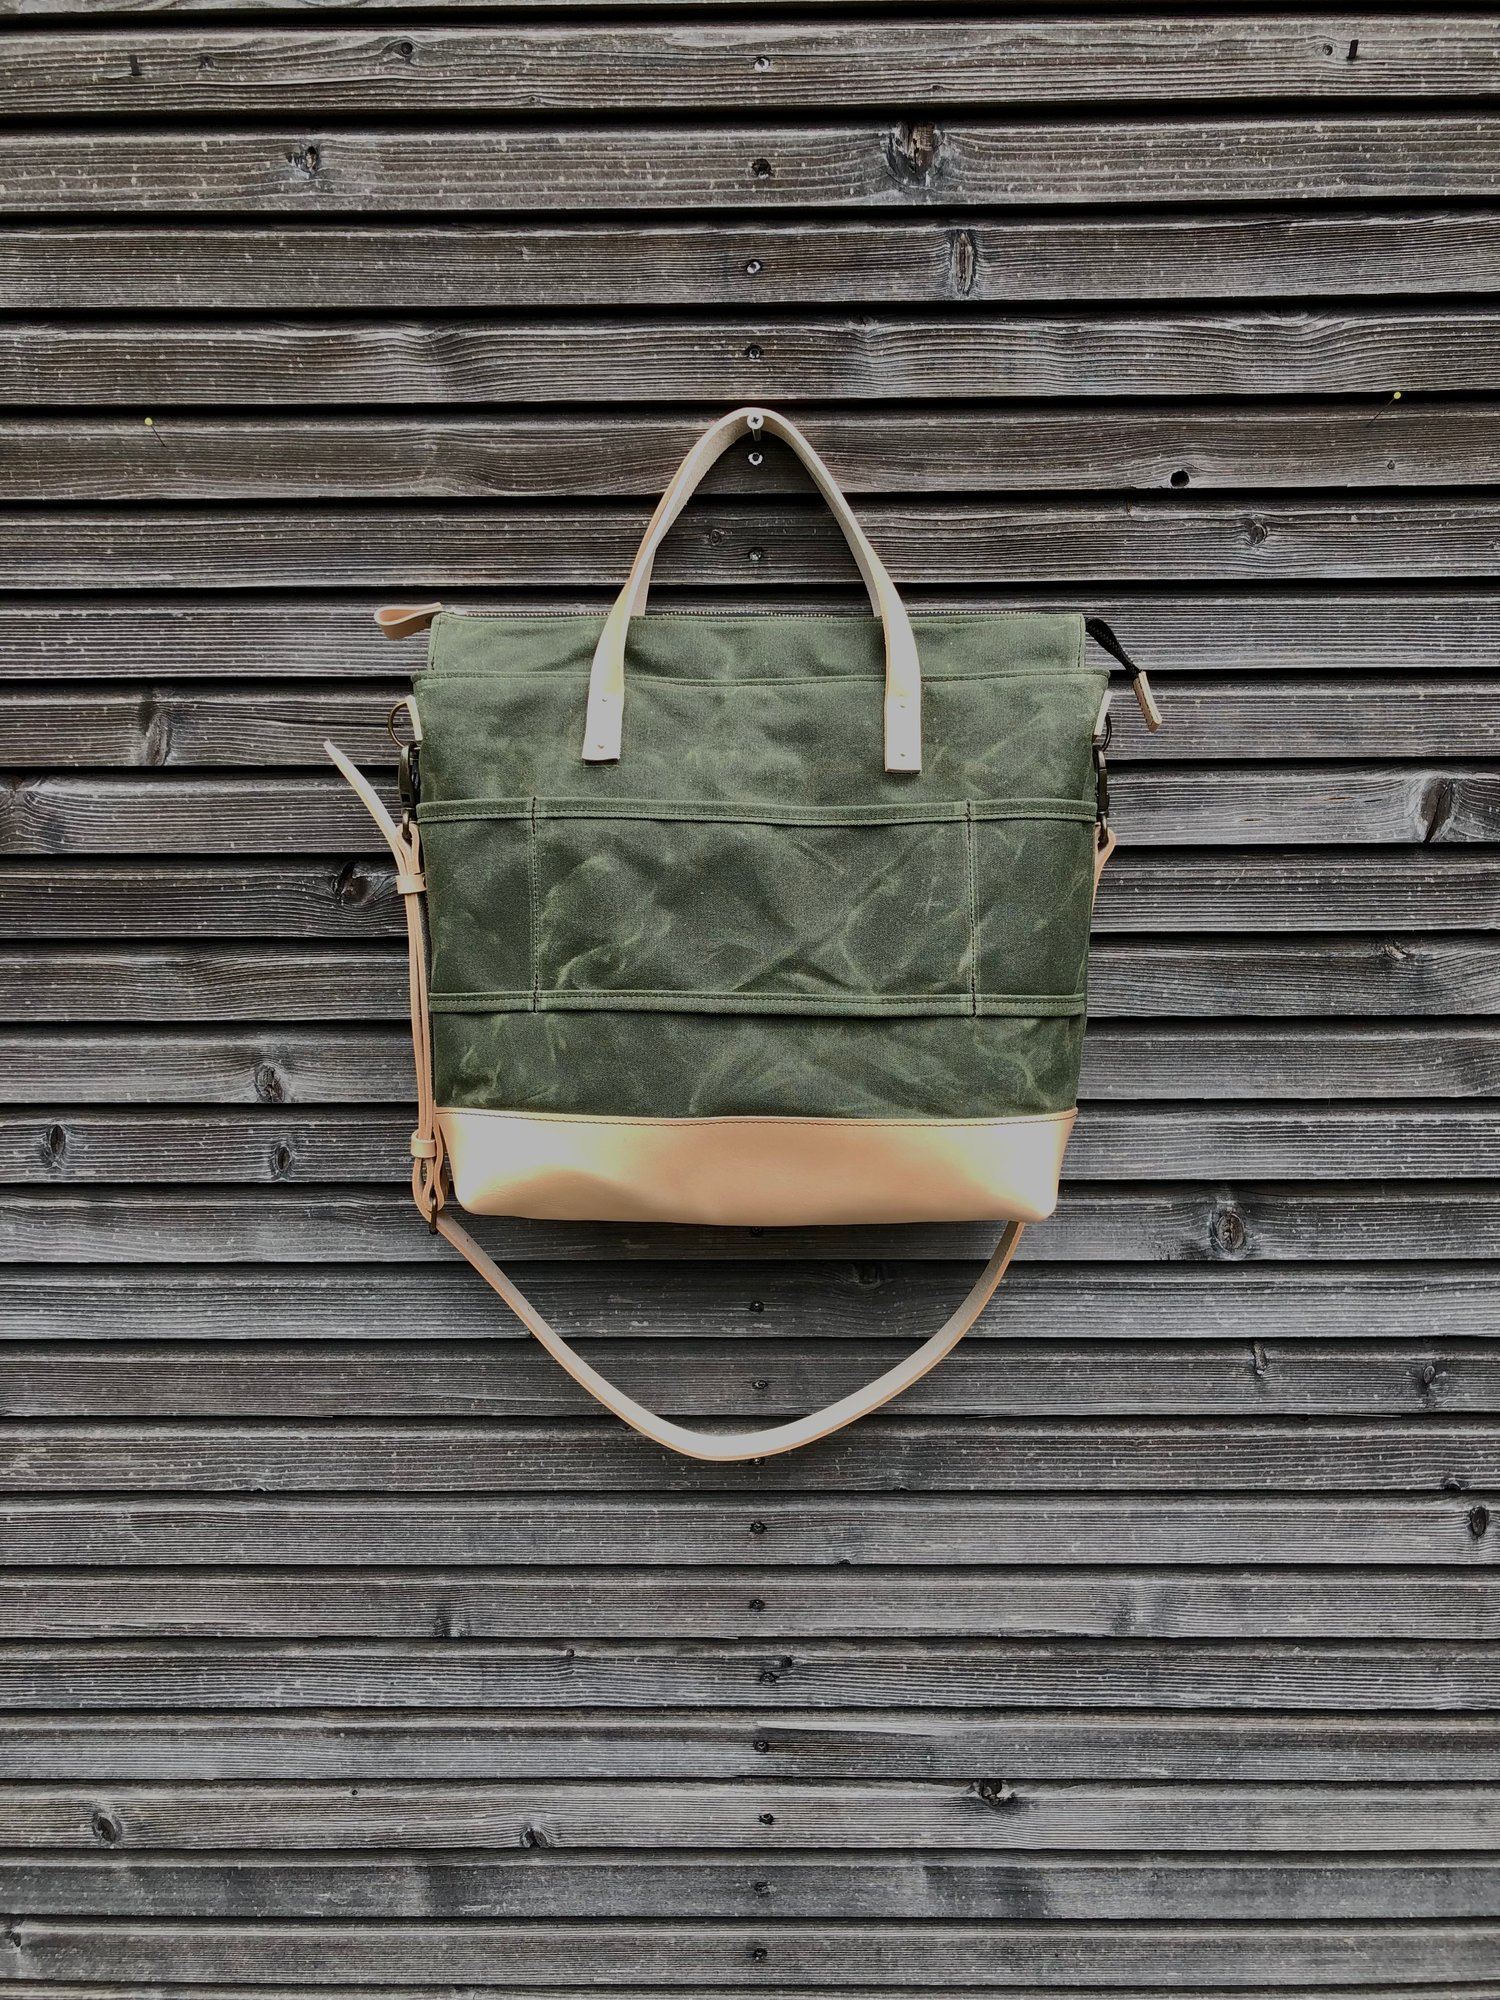 Image of Olive green waxed canvas tote bag / office bag with luggage handle attachment leather handles and sh